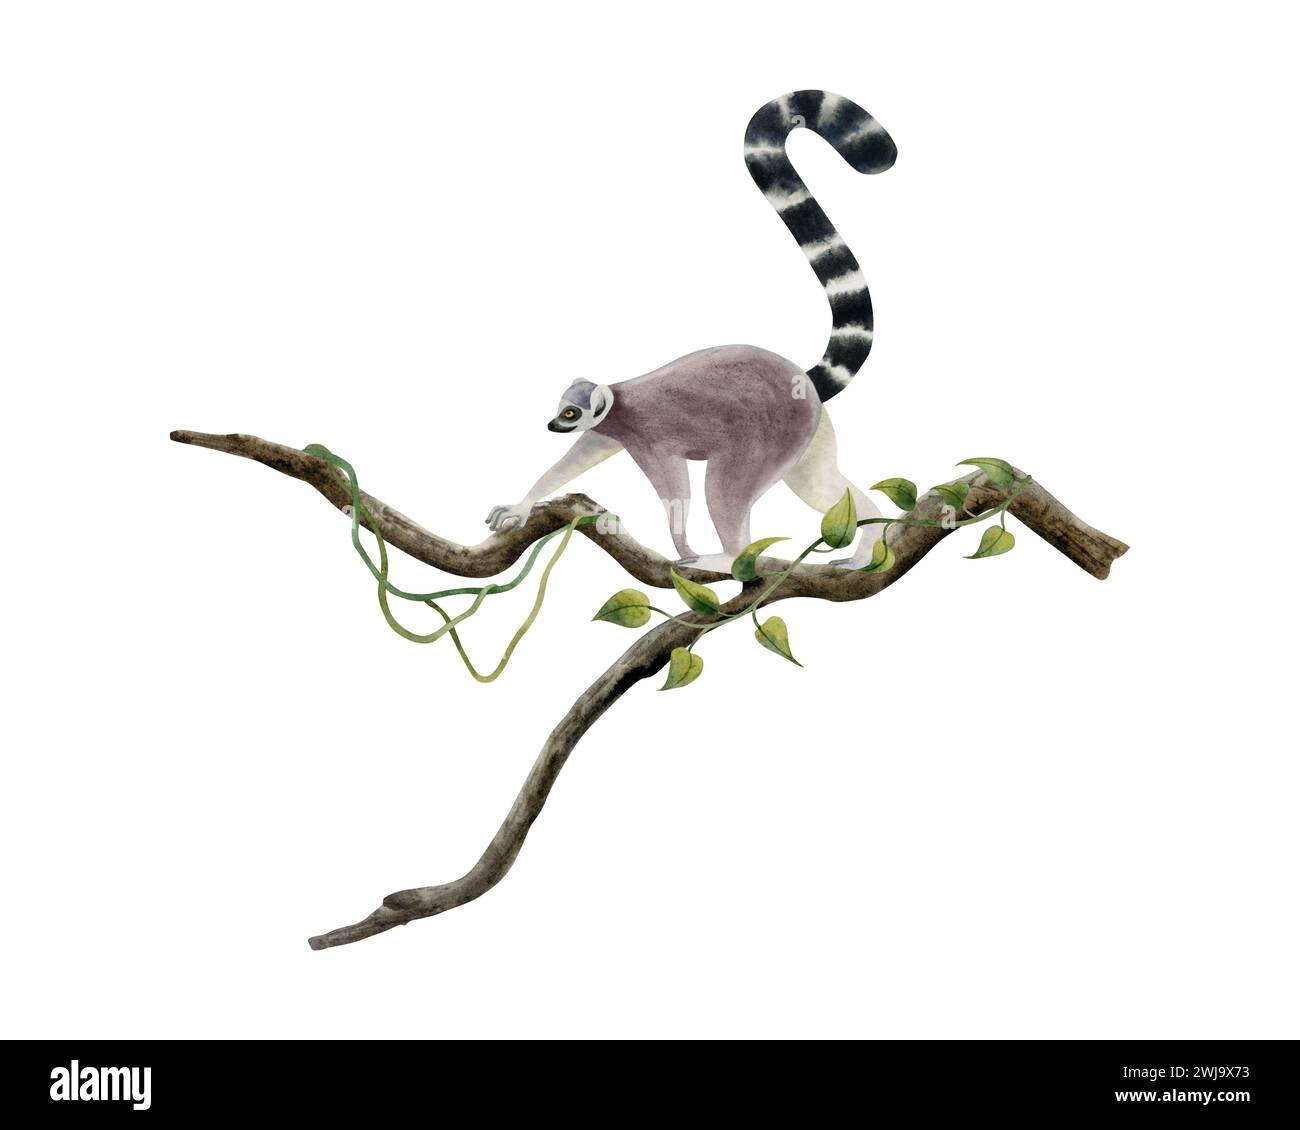 Jungle lemur walking along the branch with tropical liana vines watercolor illustration. Tropical animal monkey Stock Photo